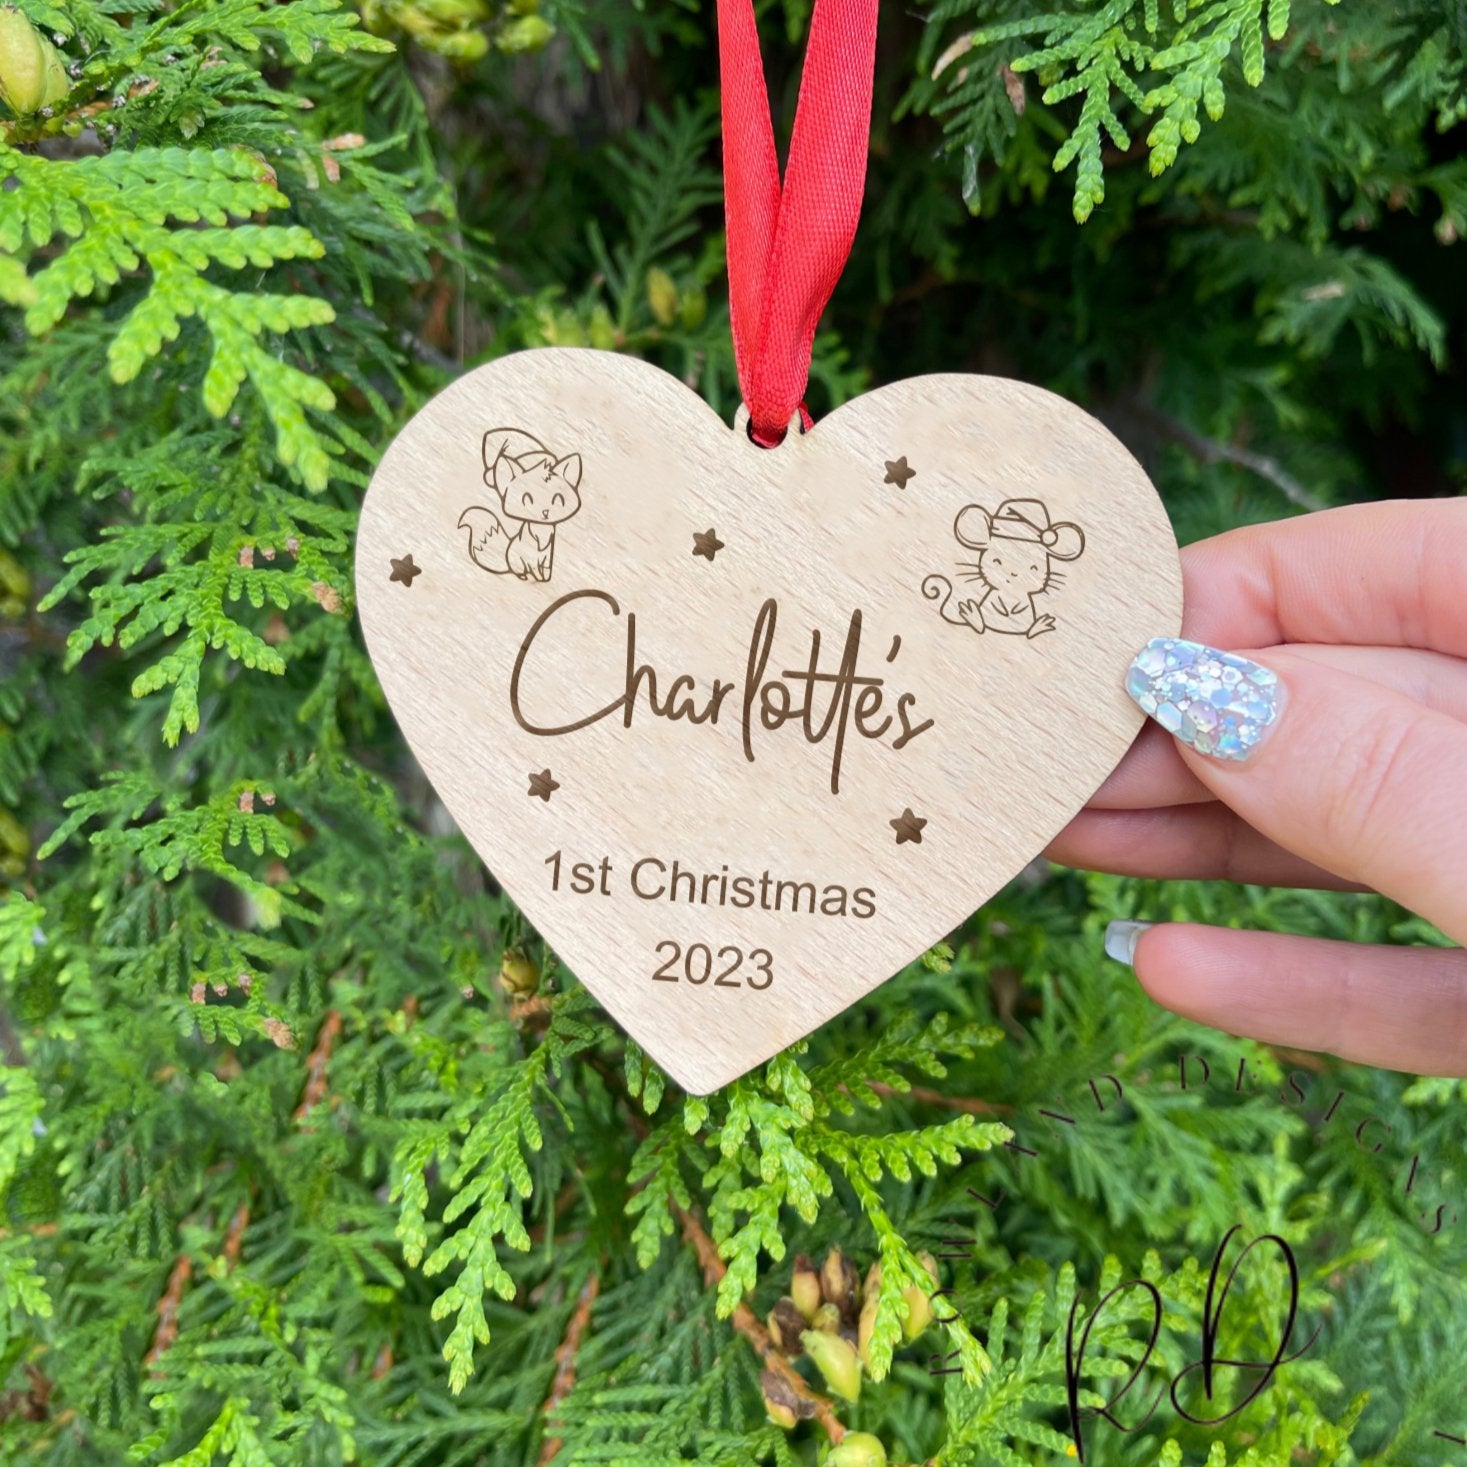 Personalised Baby's First Christmas Heart Bauble - Fox & Mouse - 1st Christmas 2023 - Premium Beech Veneer Ornament - Festive Red Ribbon - Cherished Family Keepsake